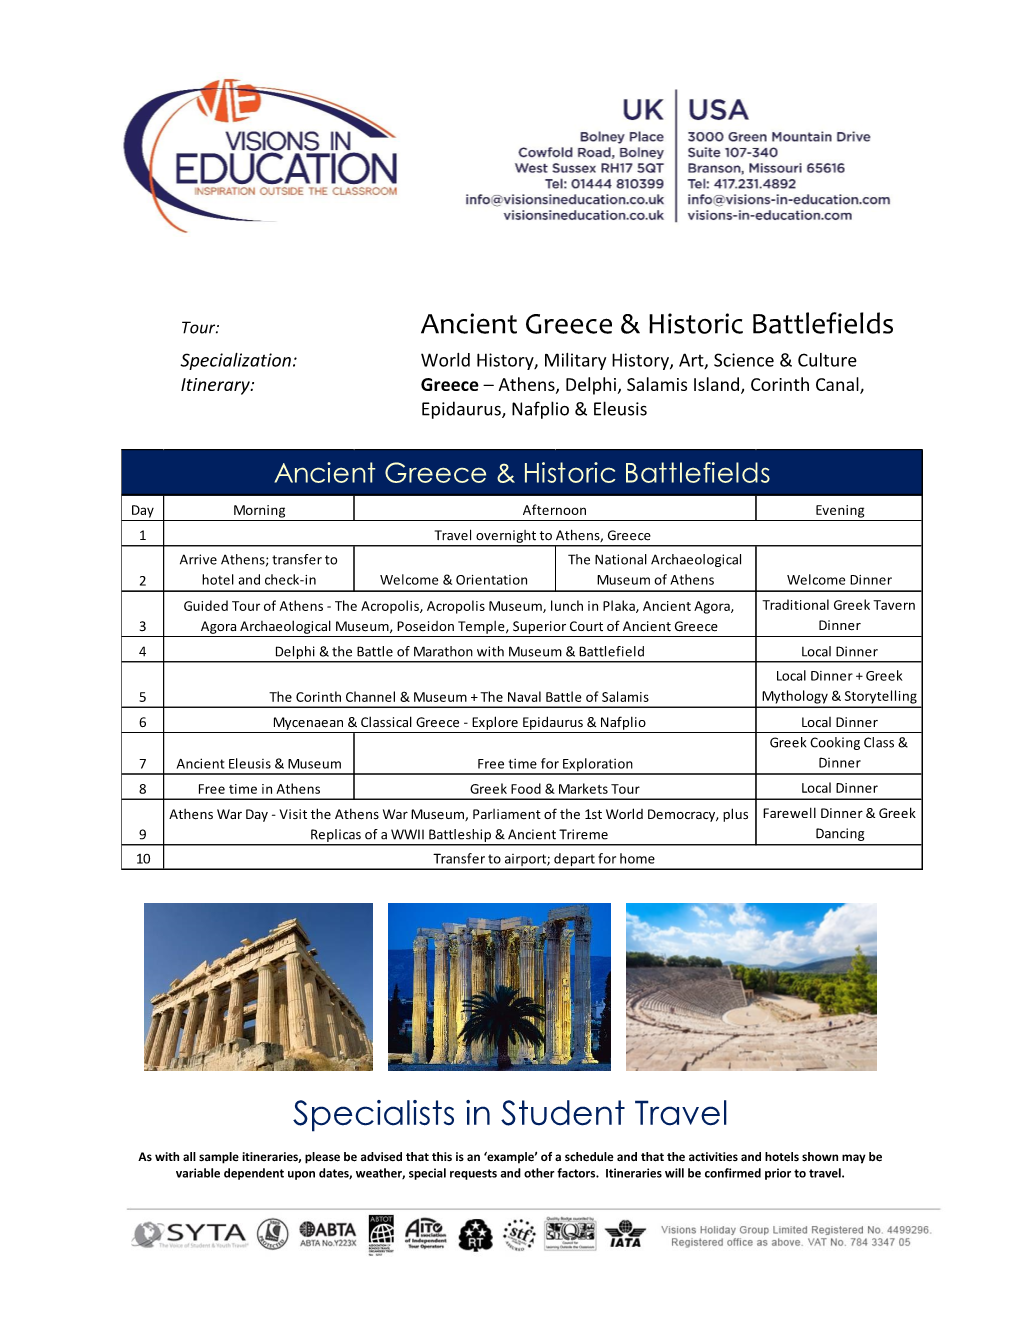 Specialists in Student Travel